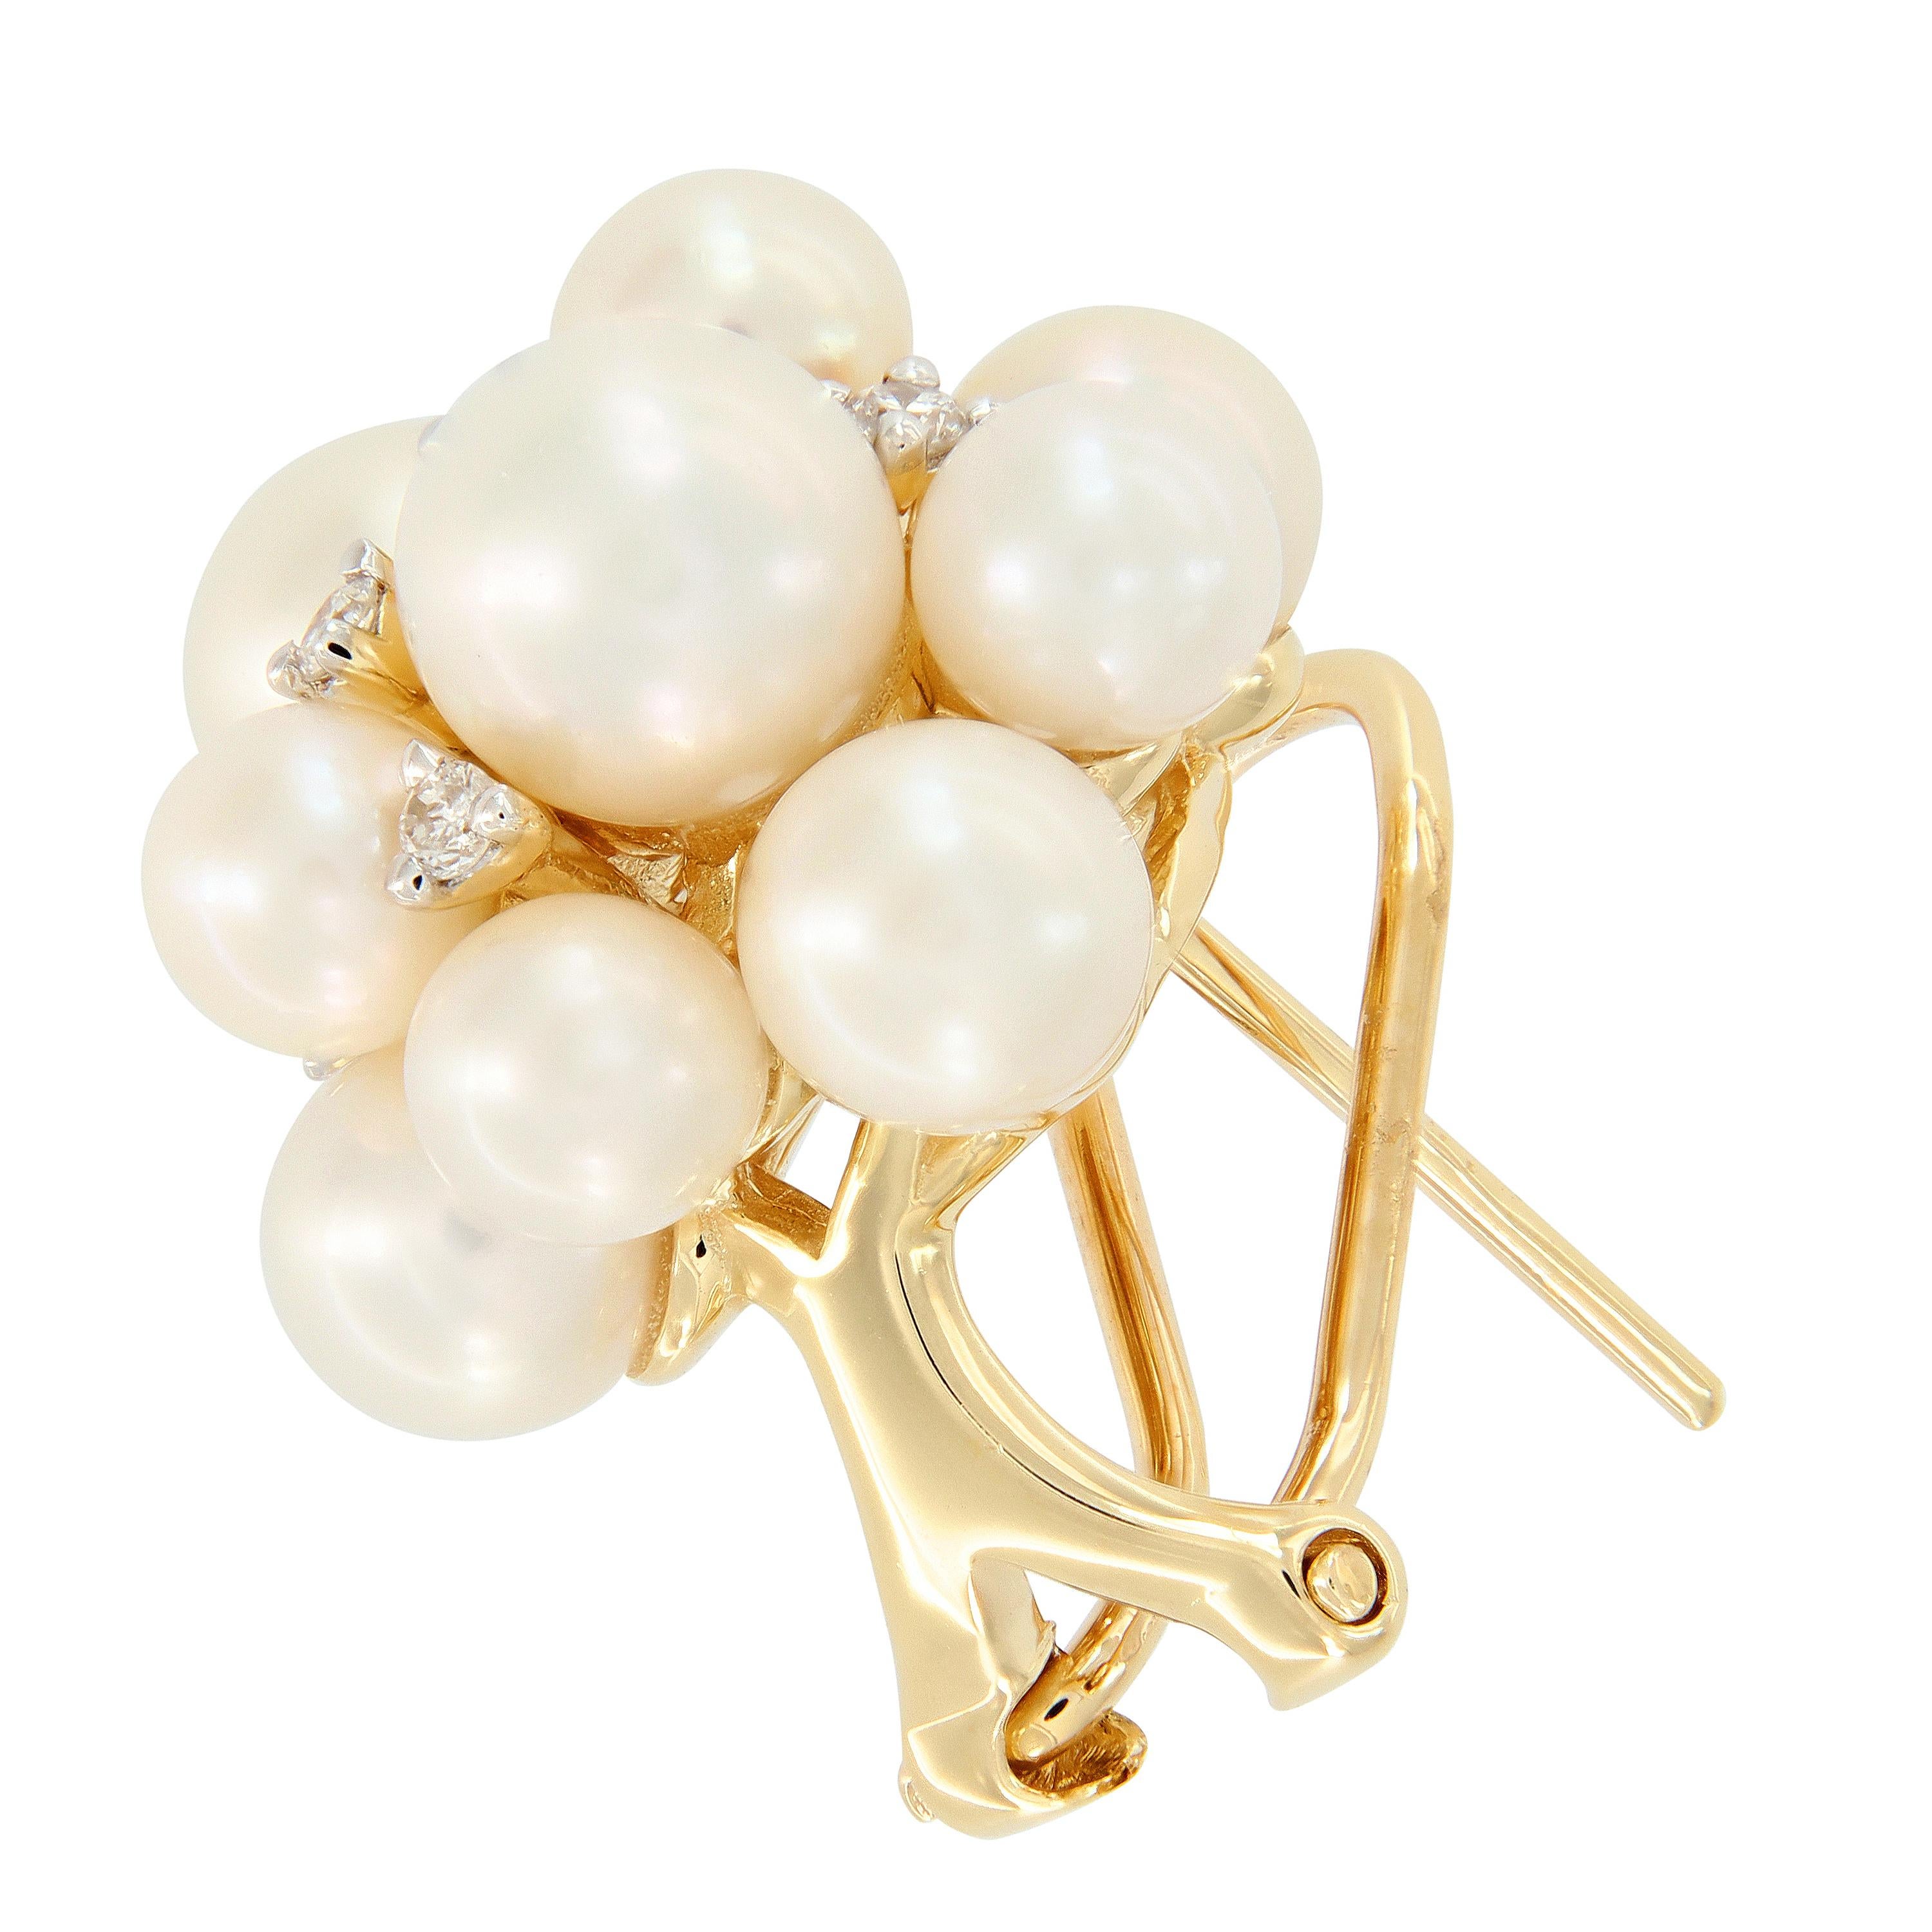 Retro inspired in design, but timeless in wear. The pearls and diamonds are artfully arranged and are set in 14k yellow gold.

Diamonds 0.17 cttw